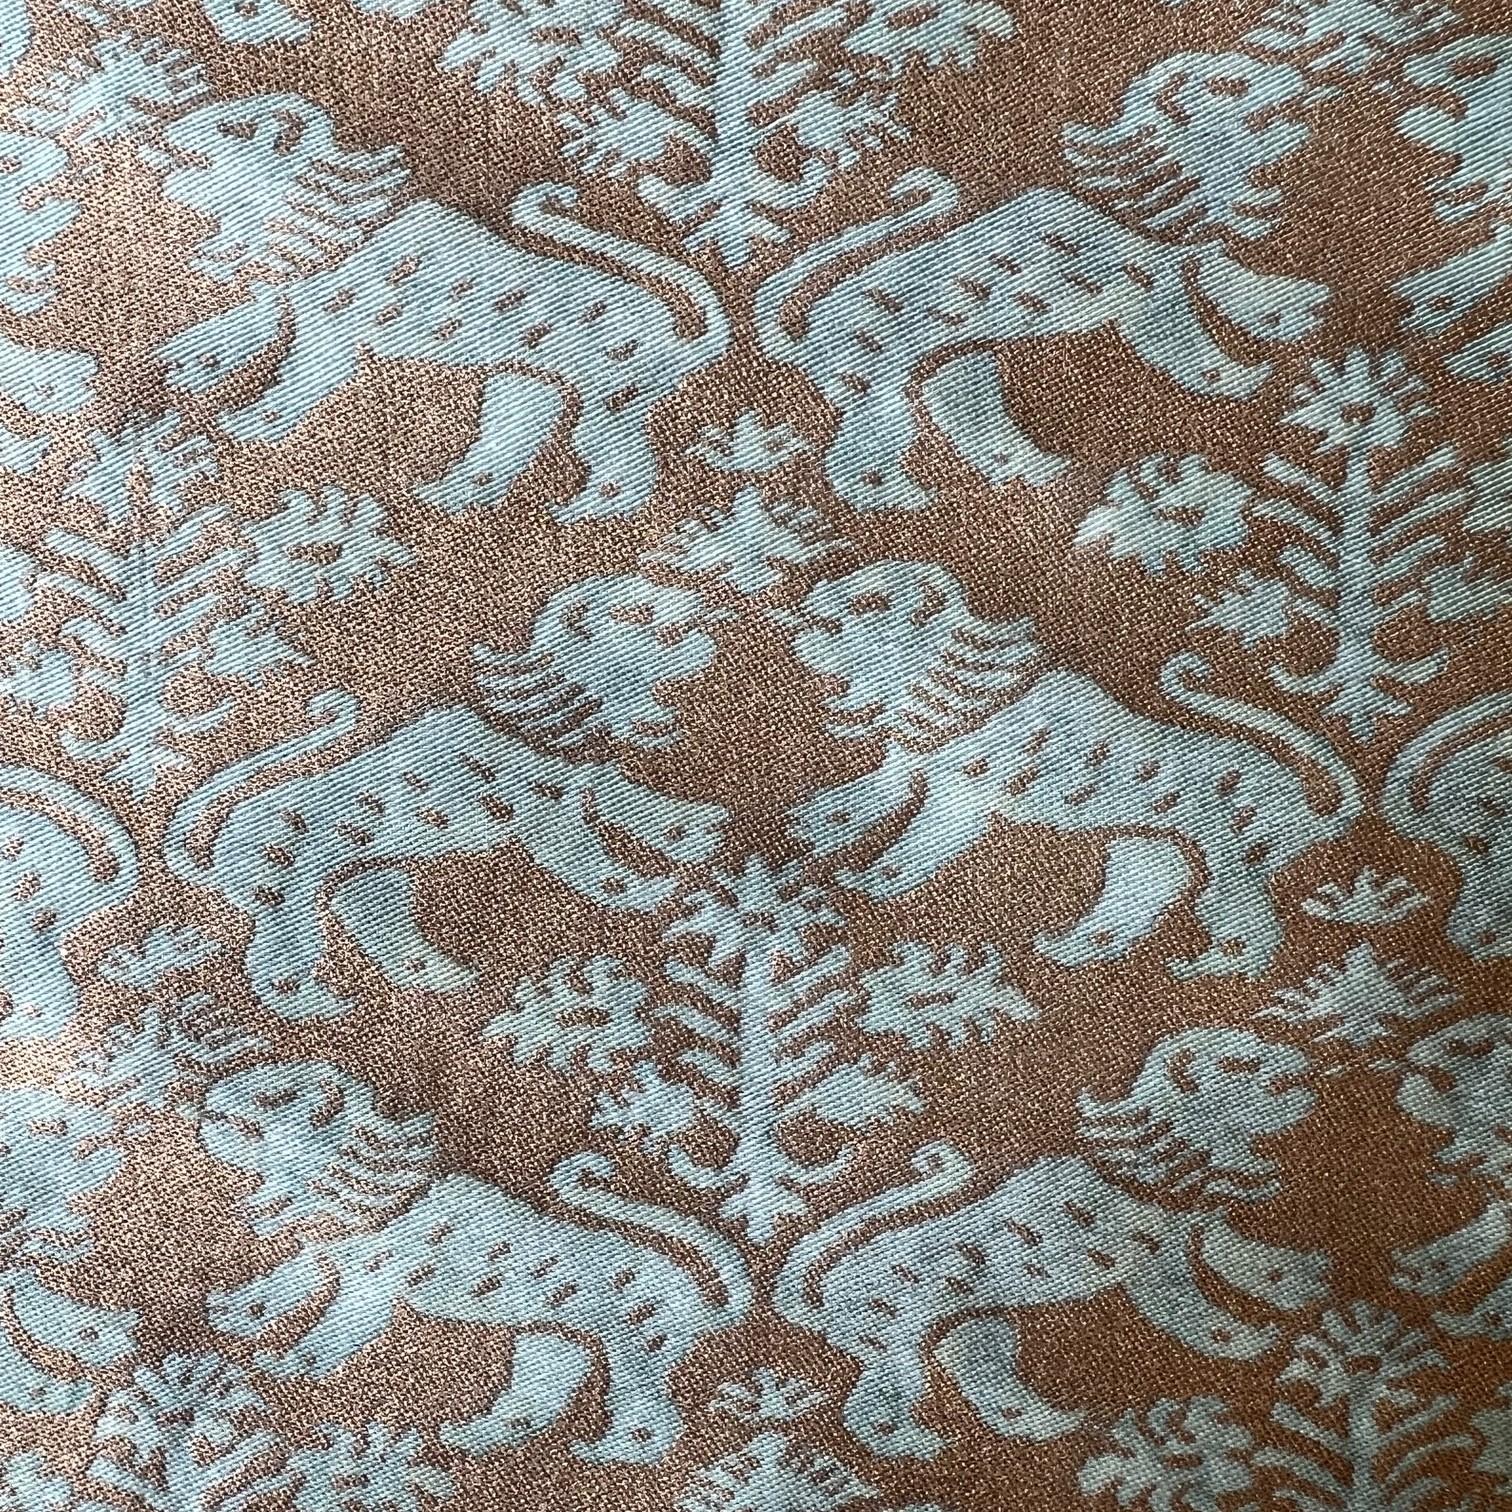 21st c. print run of Fortuny Richilieu fabric in aquamarine with a silvery gold texture. Playful in design, Richilieu portrays a fascinating tale of 17th-century Europe through the symbols of a lion (Spain), an eagle (Austria), and a lily (France).